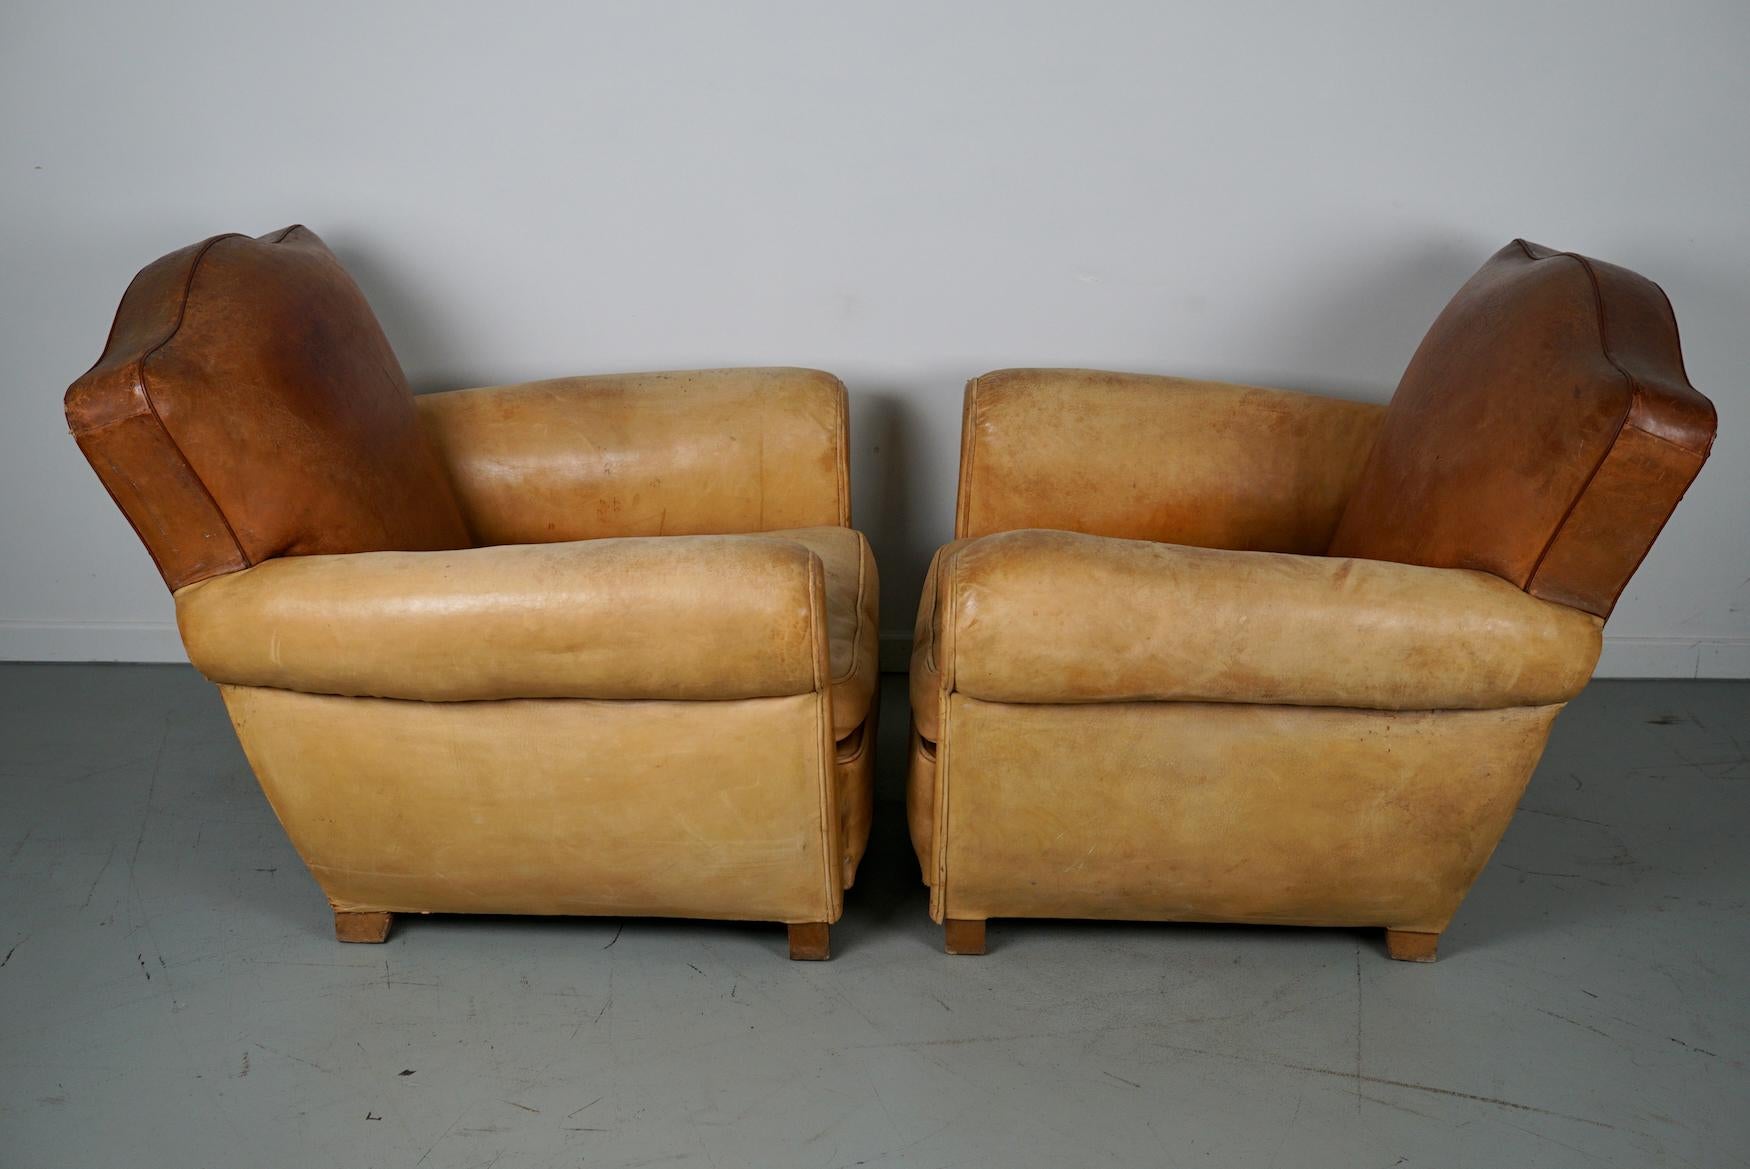  Pair of French Cognac Moustache Back Leather Club Chairs, 1940s For Sale 15